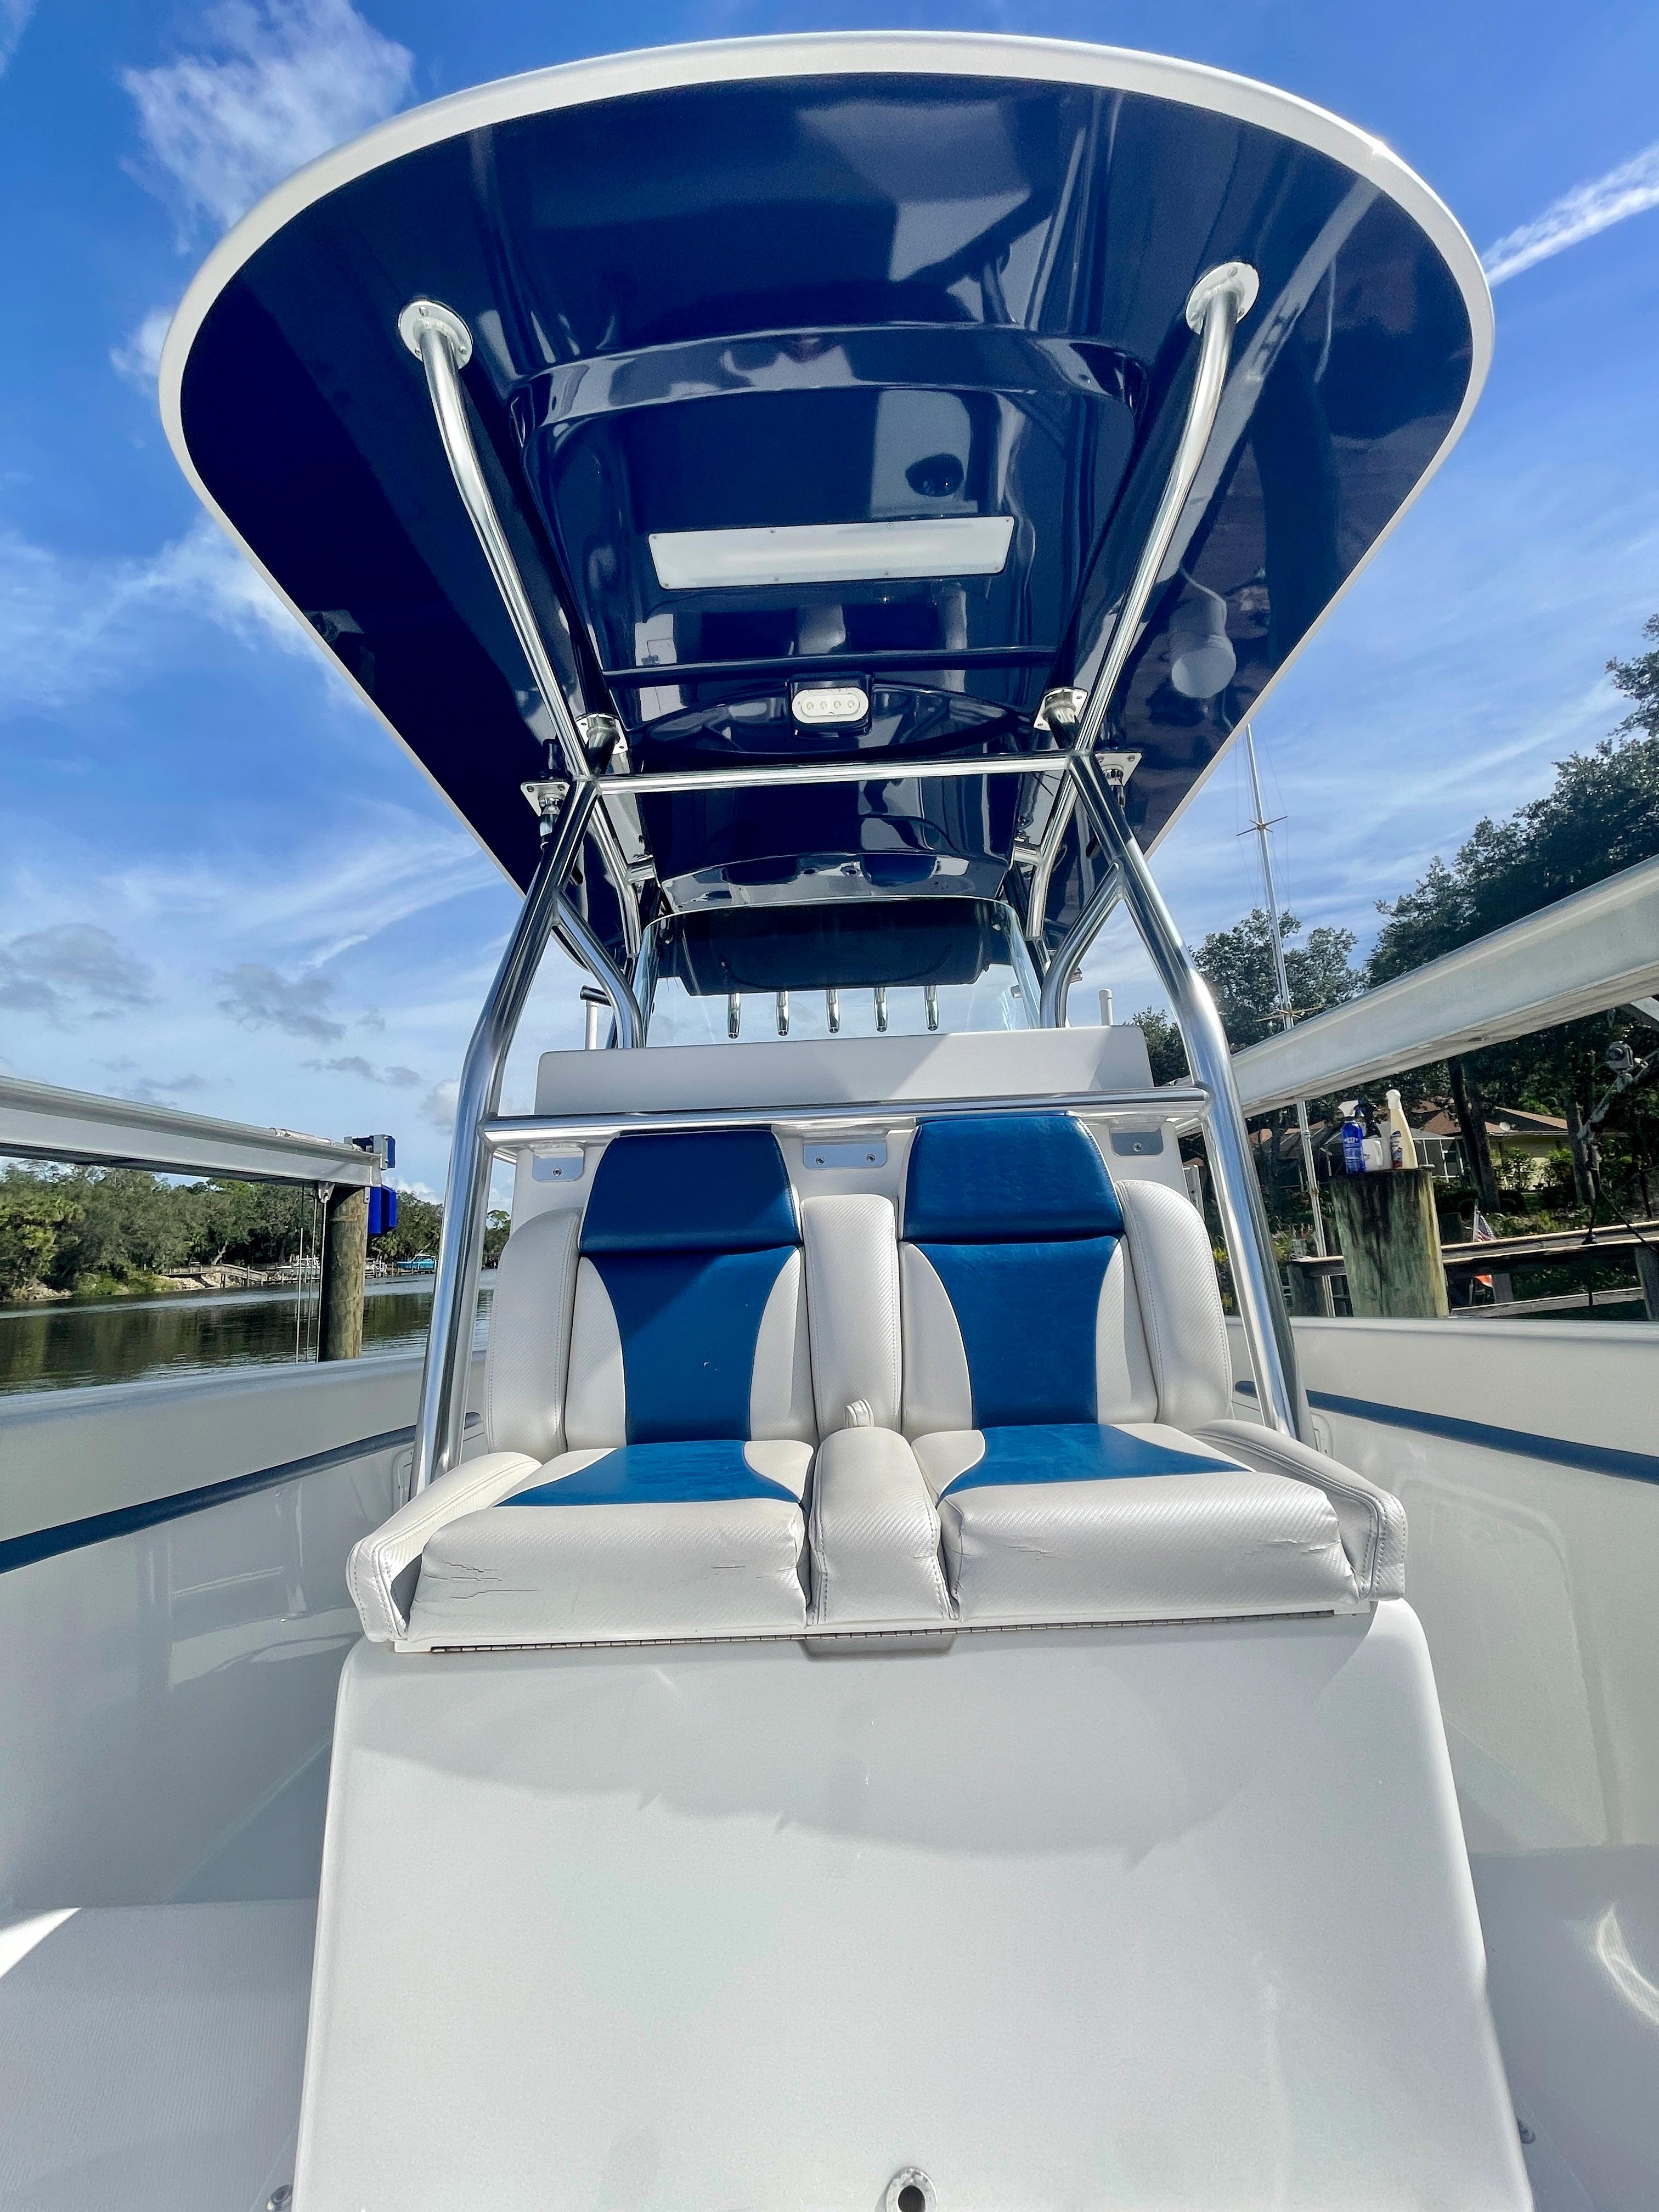 2016 Bluewater 2850 - Fwd seating